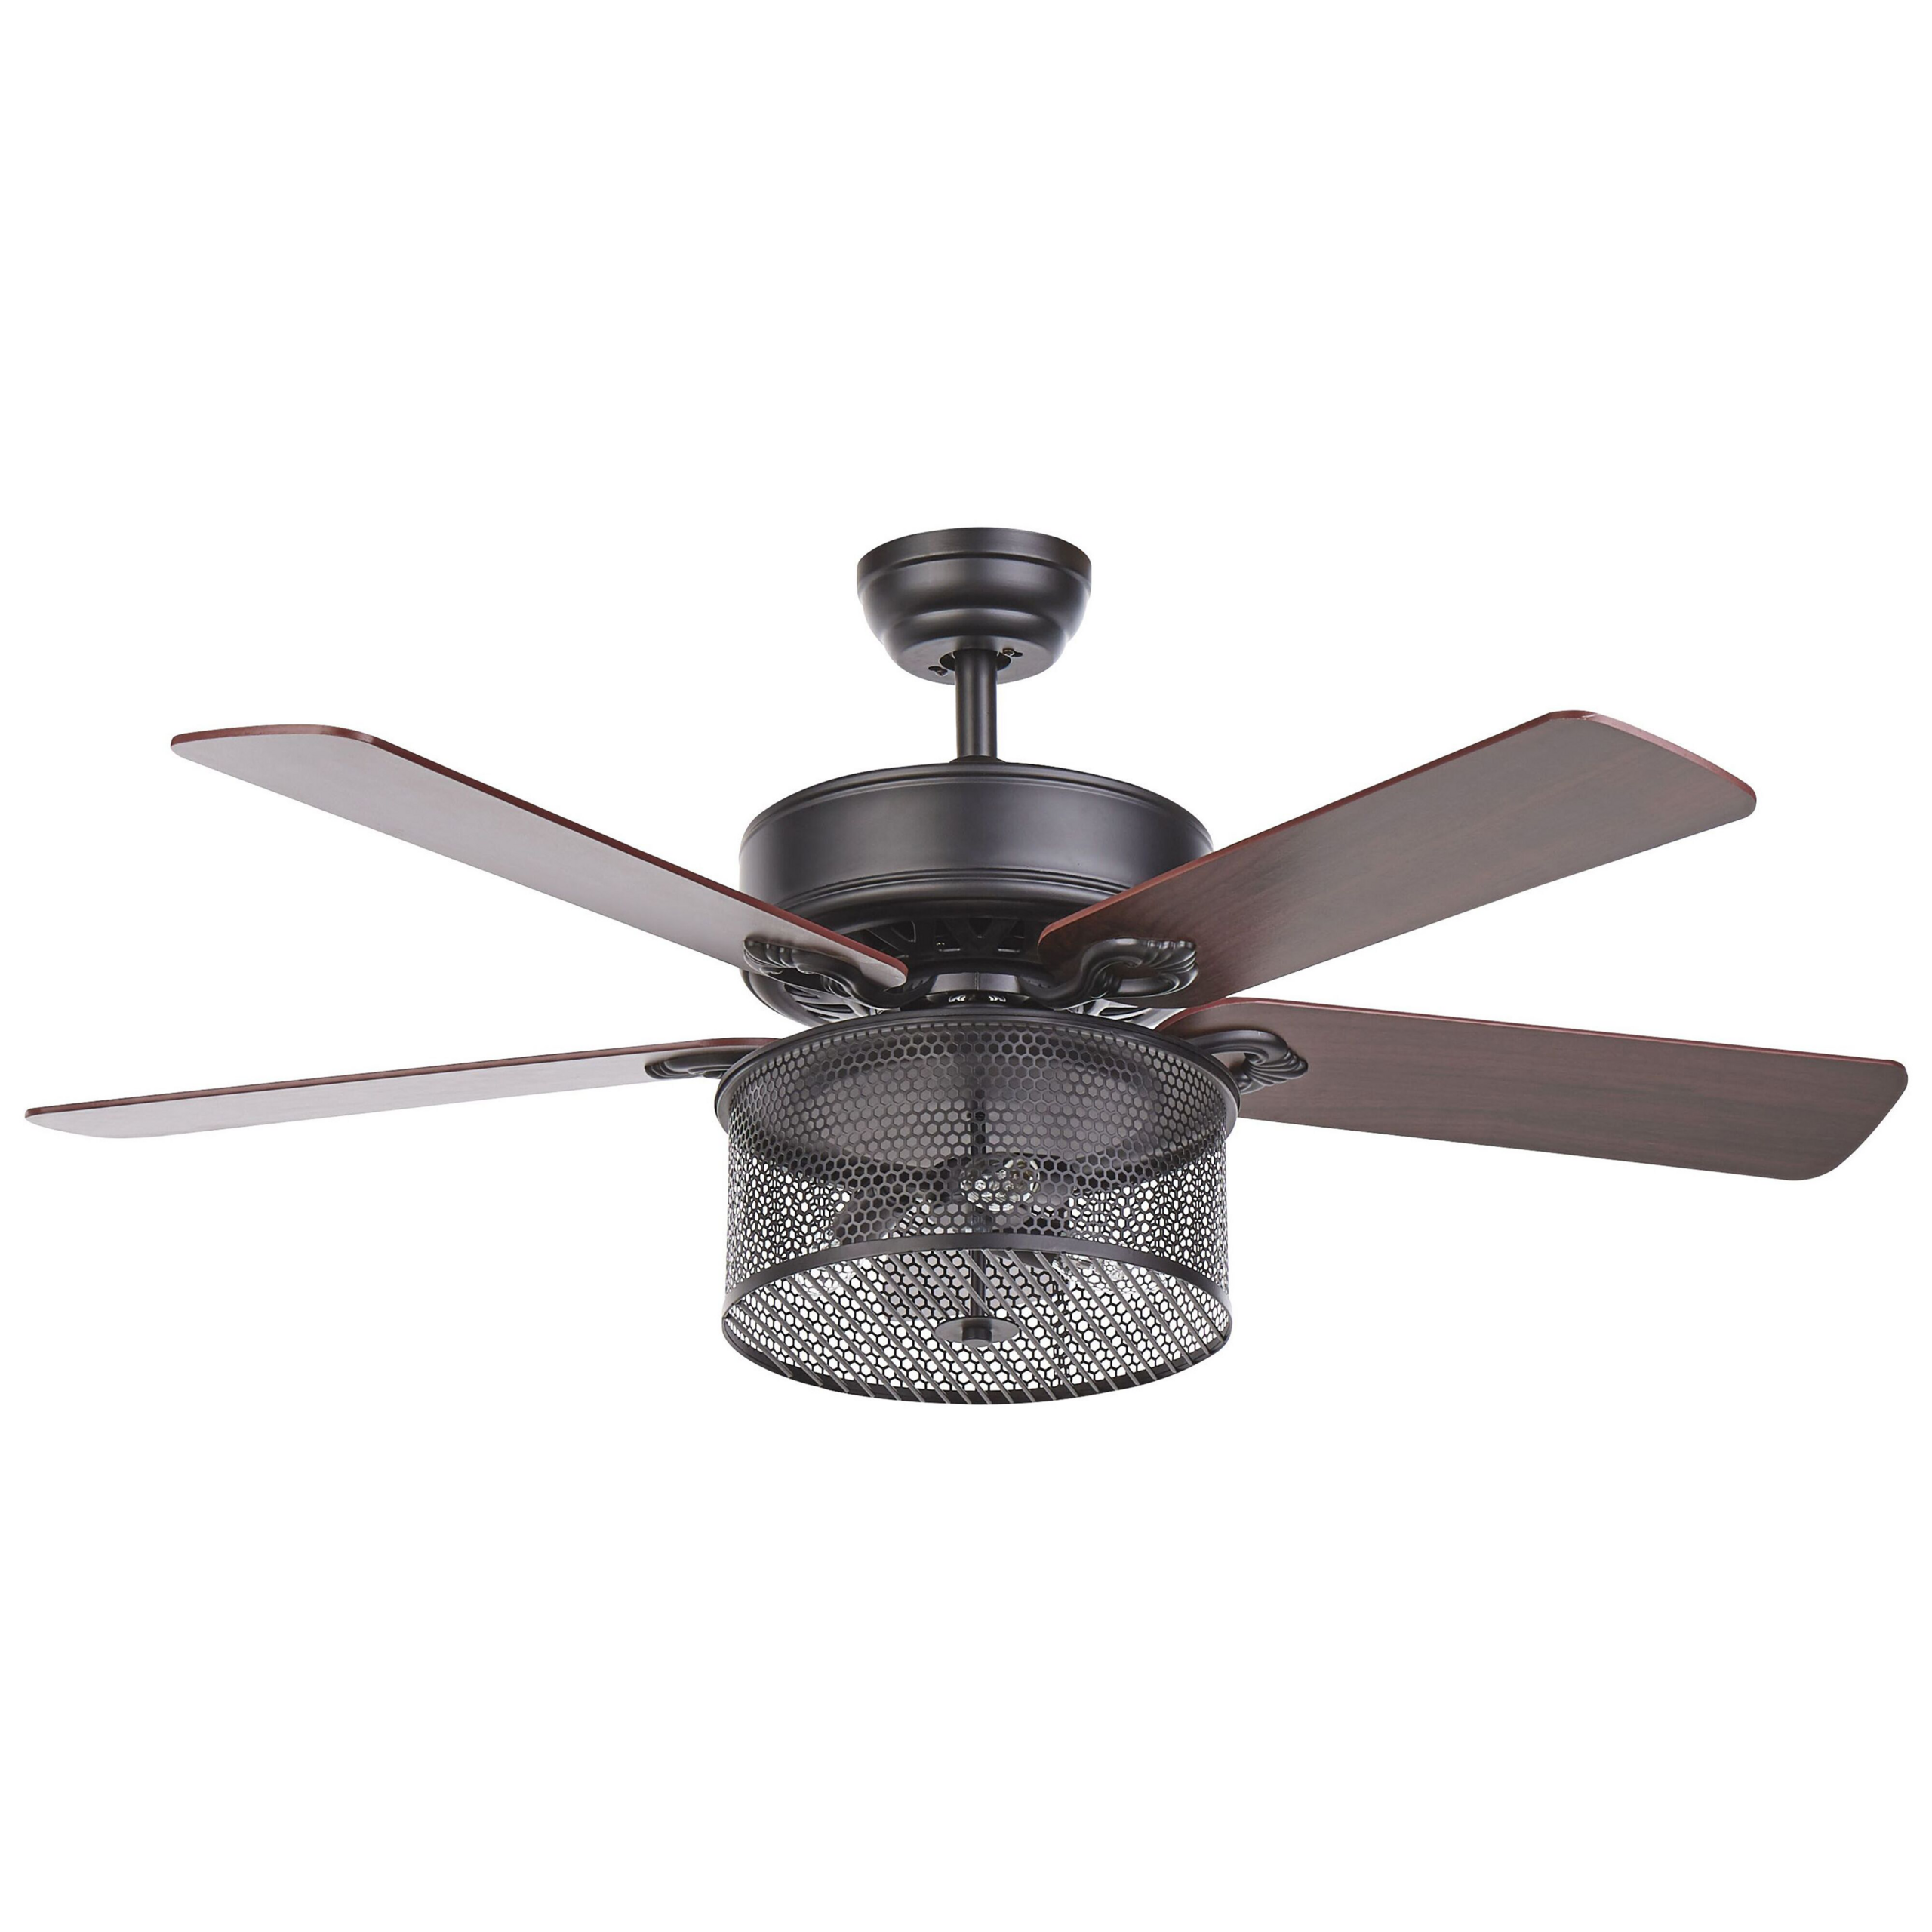 Beliani Ceiling Fan with Light Black Glass Metal Plywood Reversible Blades with Remote Control 3 Speeds Switch Timer Industrial Retro Design